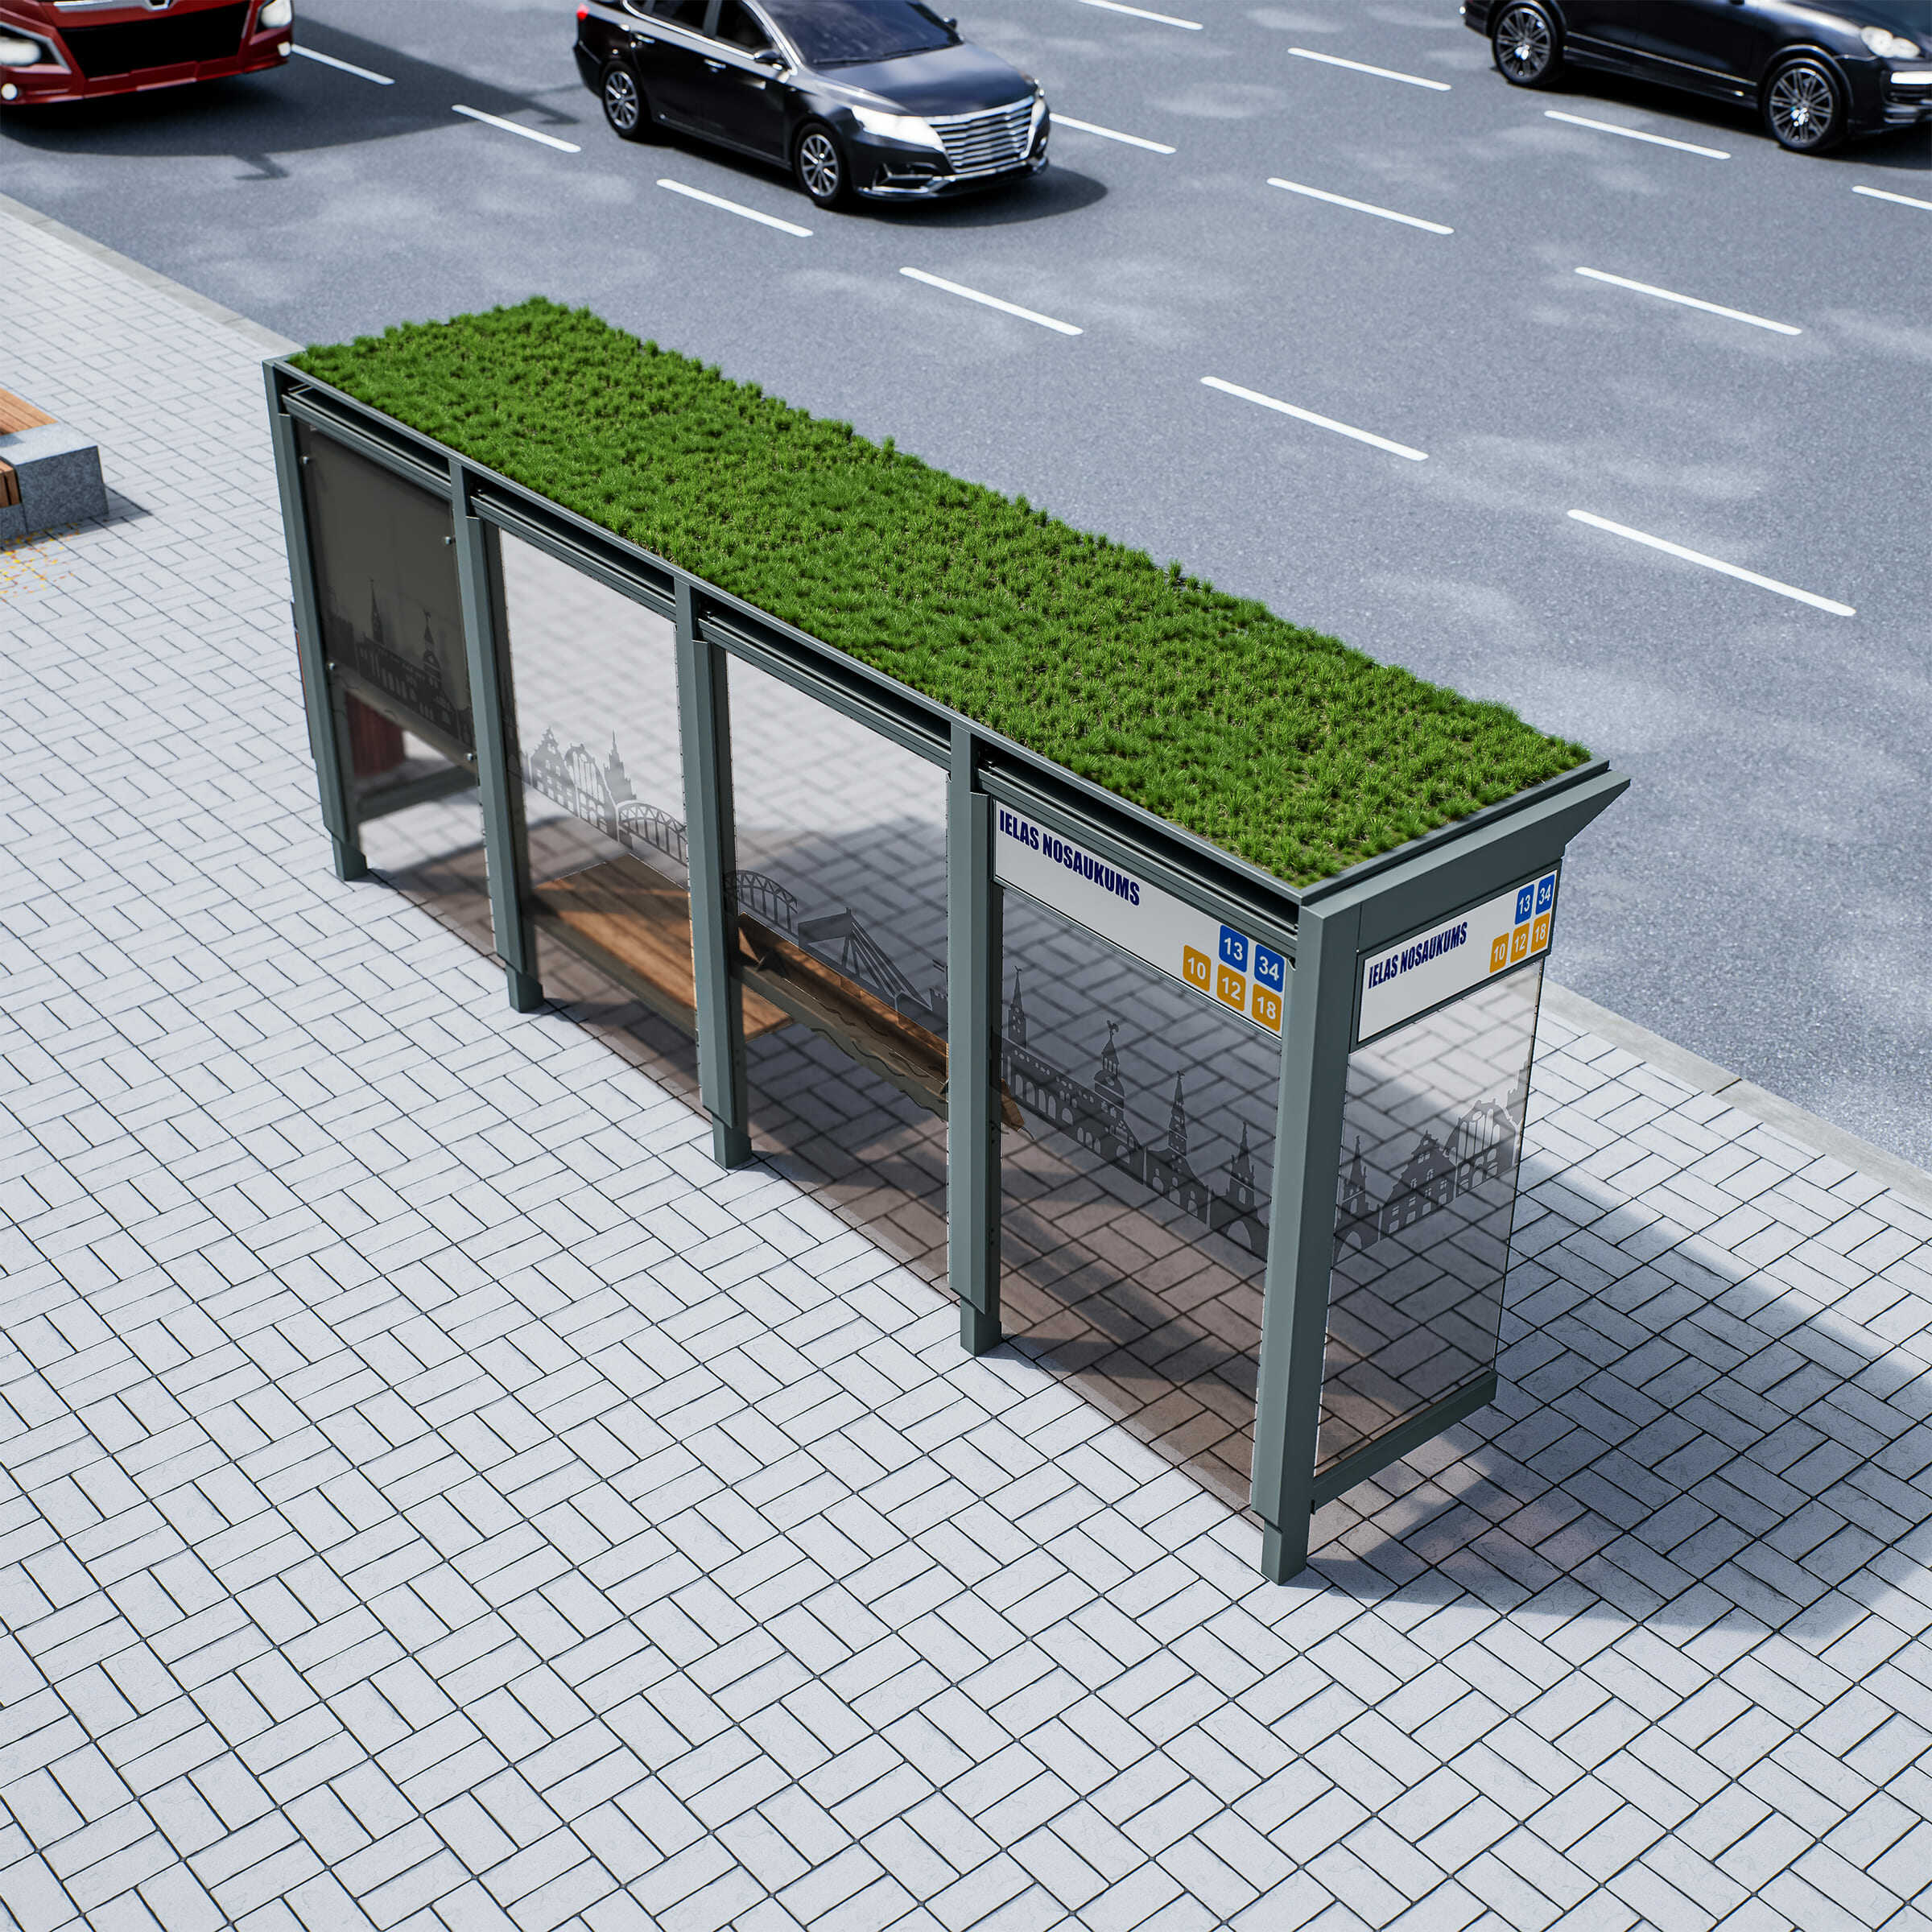 Bus Shelter RIGA (S/M) Green Panels Rooftop Set By PALAMI Group - Compact Outdoor Advertising Display